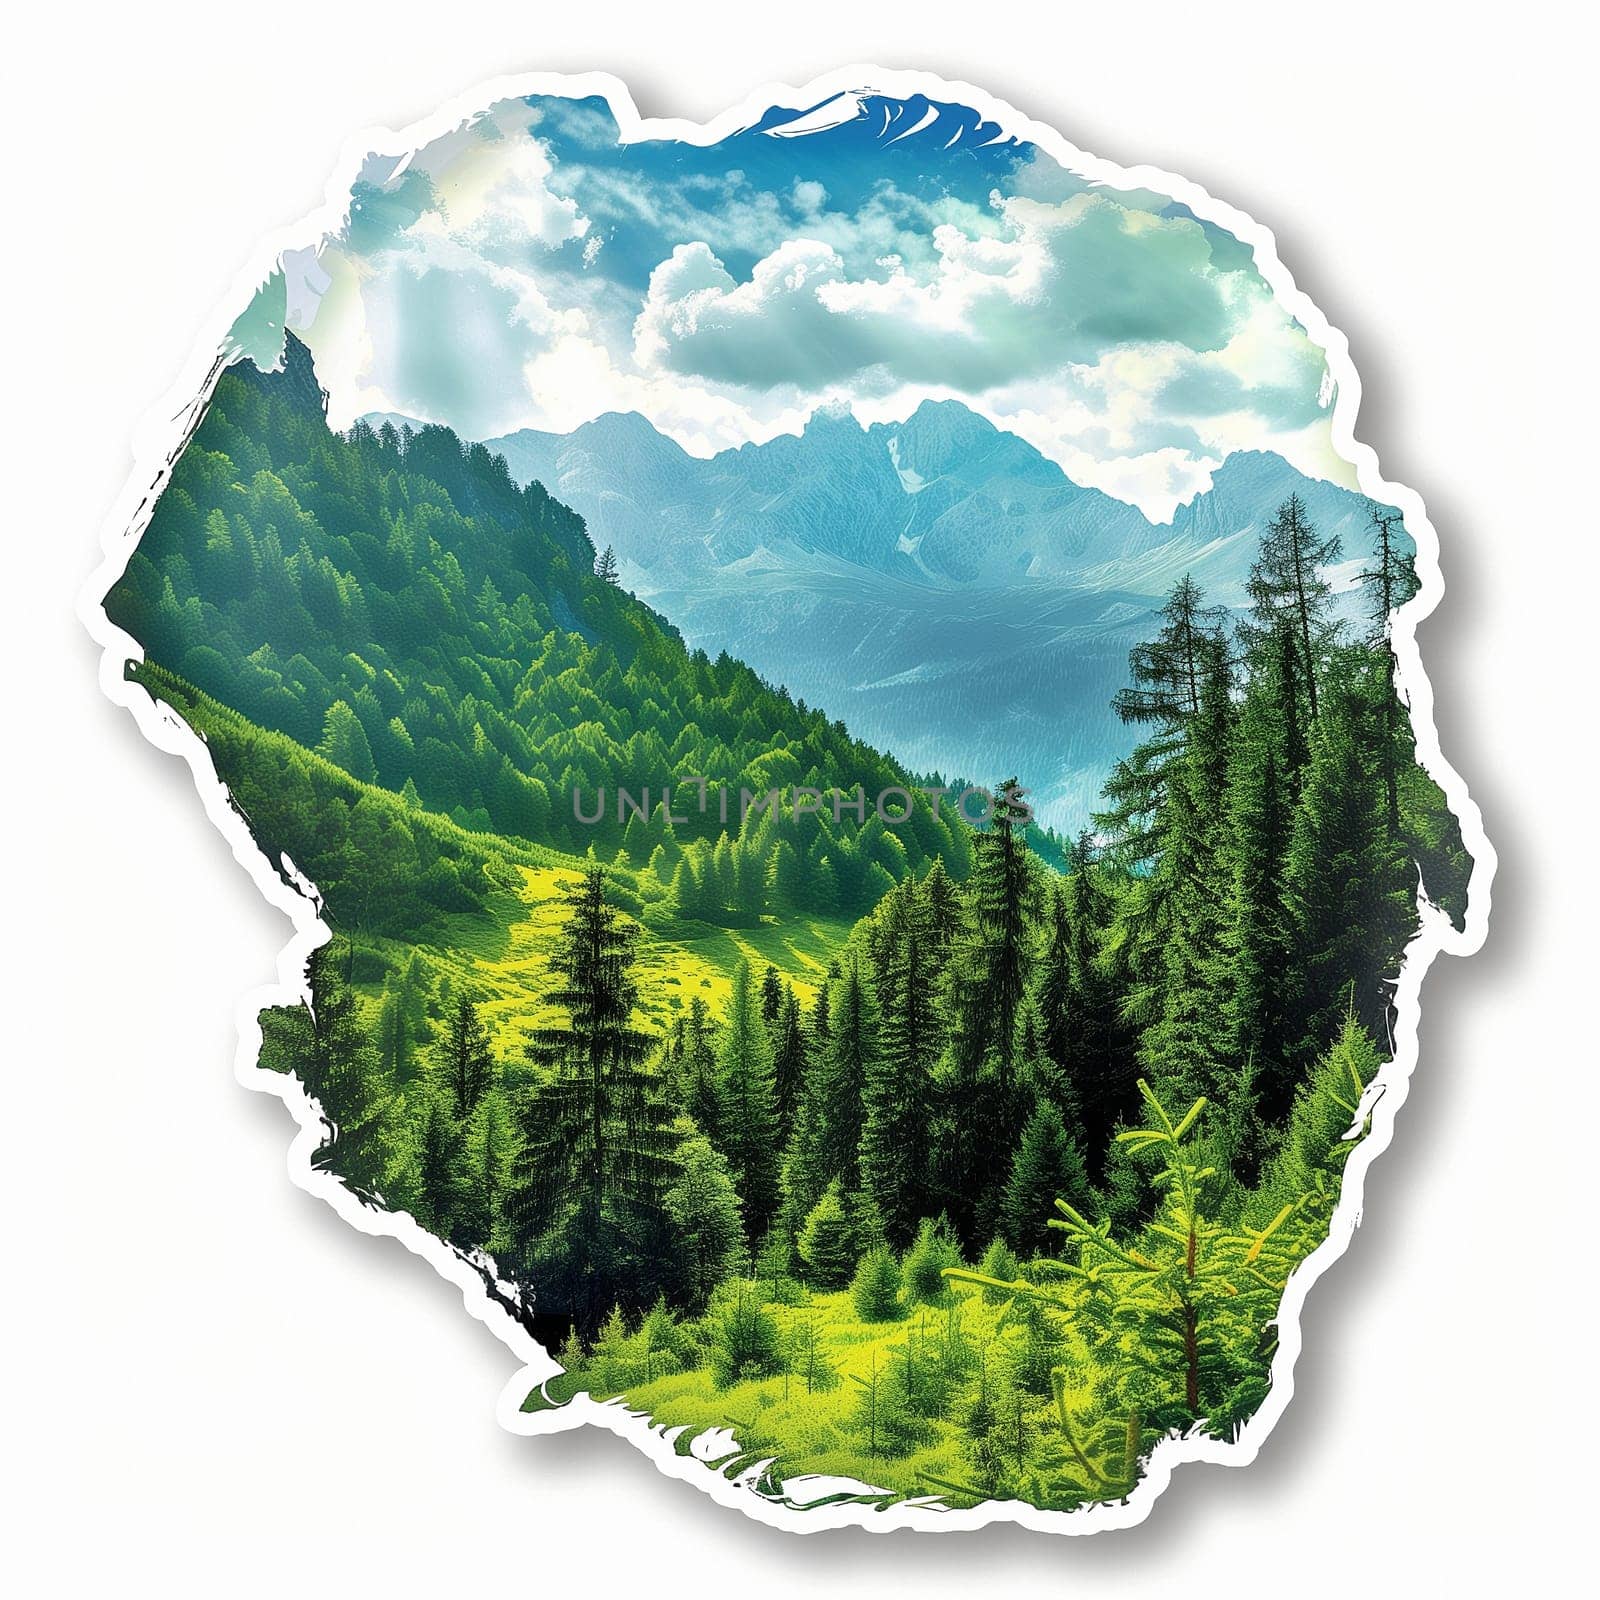 Summer stickers with forest, field, sky and hiking by NeuroSky